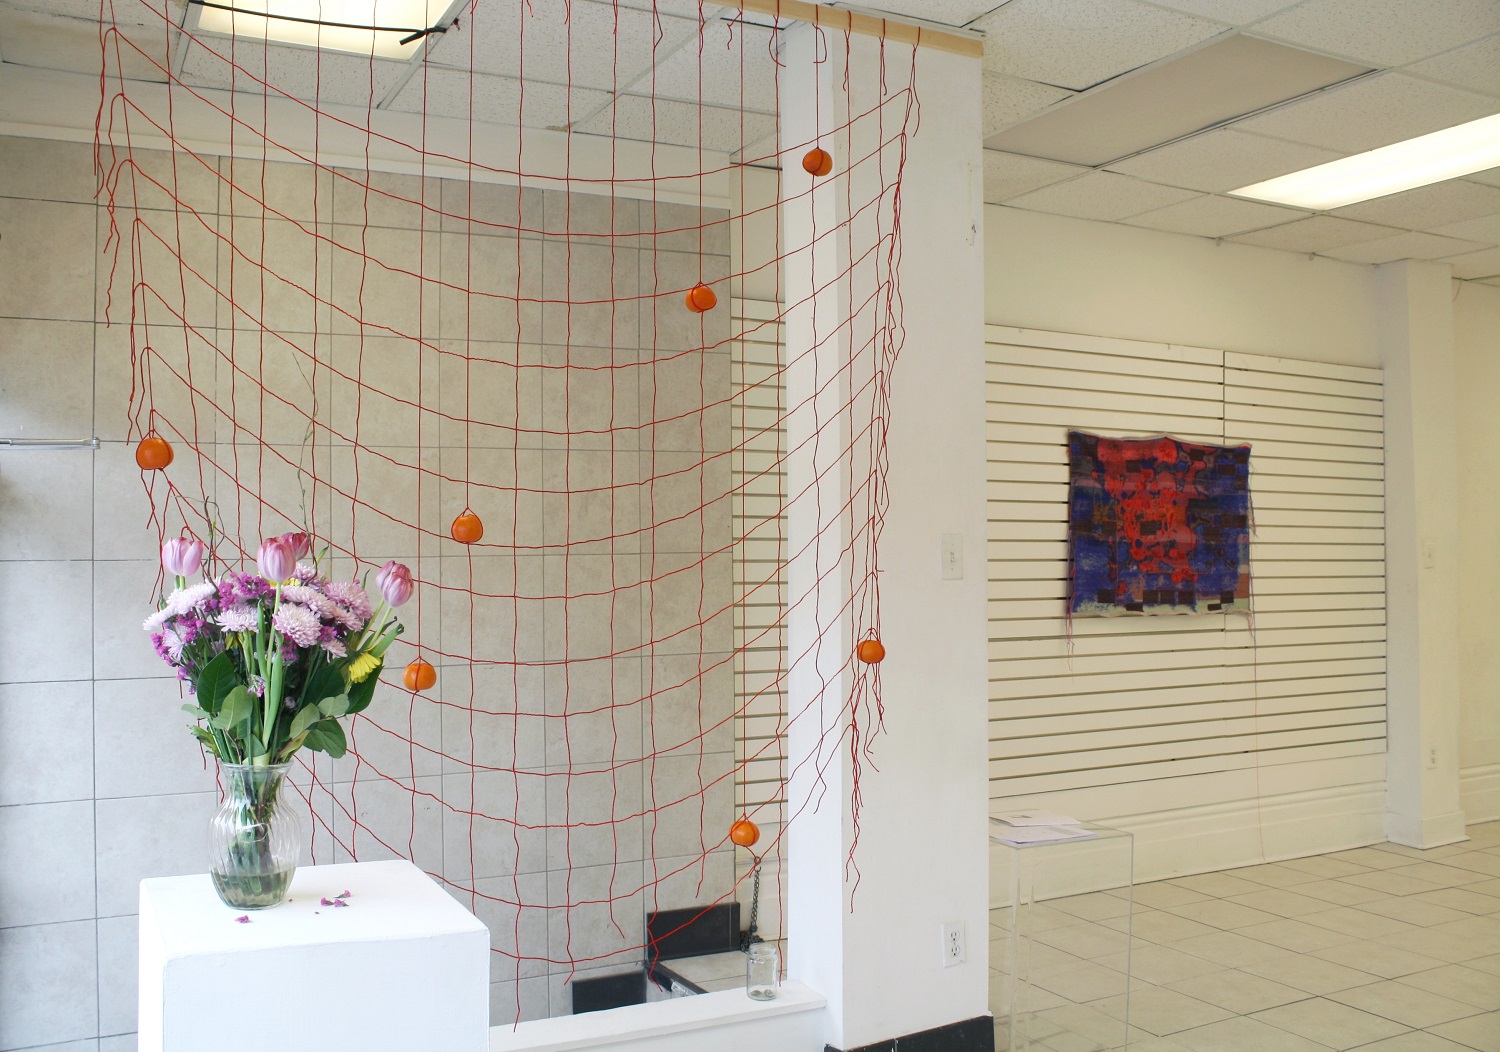 A bouquet of vases, a red grid of string, and a red and blue tapestry hang in a gallery with white walls.